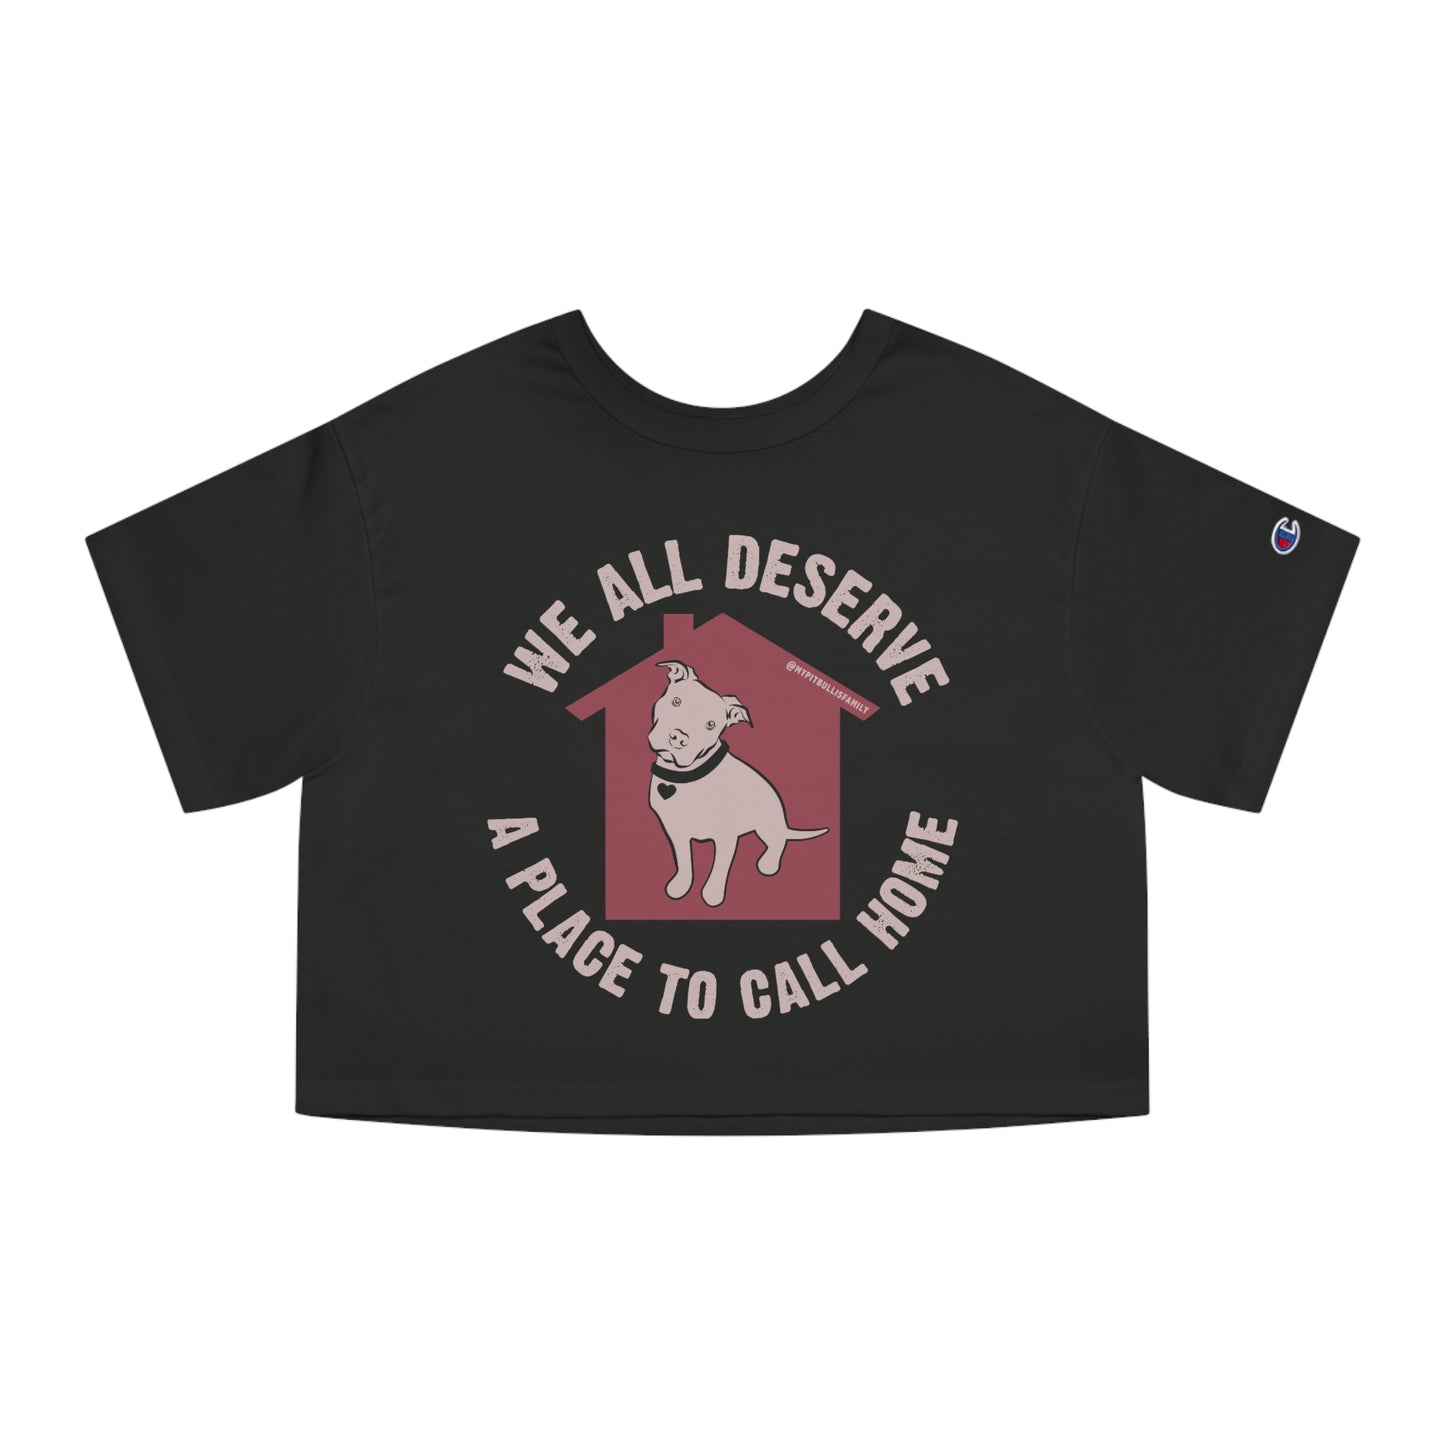 We All Deserve a Place to Call Home Champion Women's Heritage Cropped T-Shirt